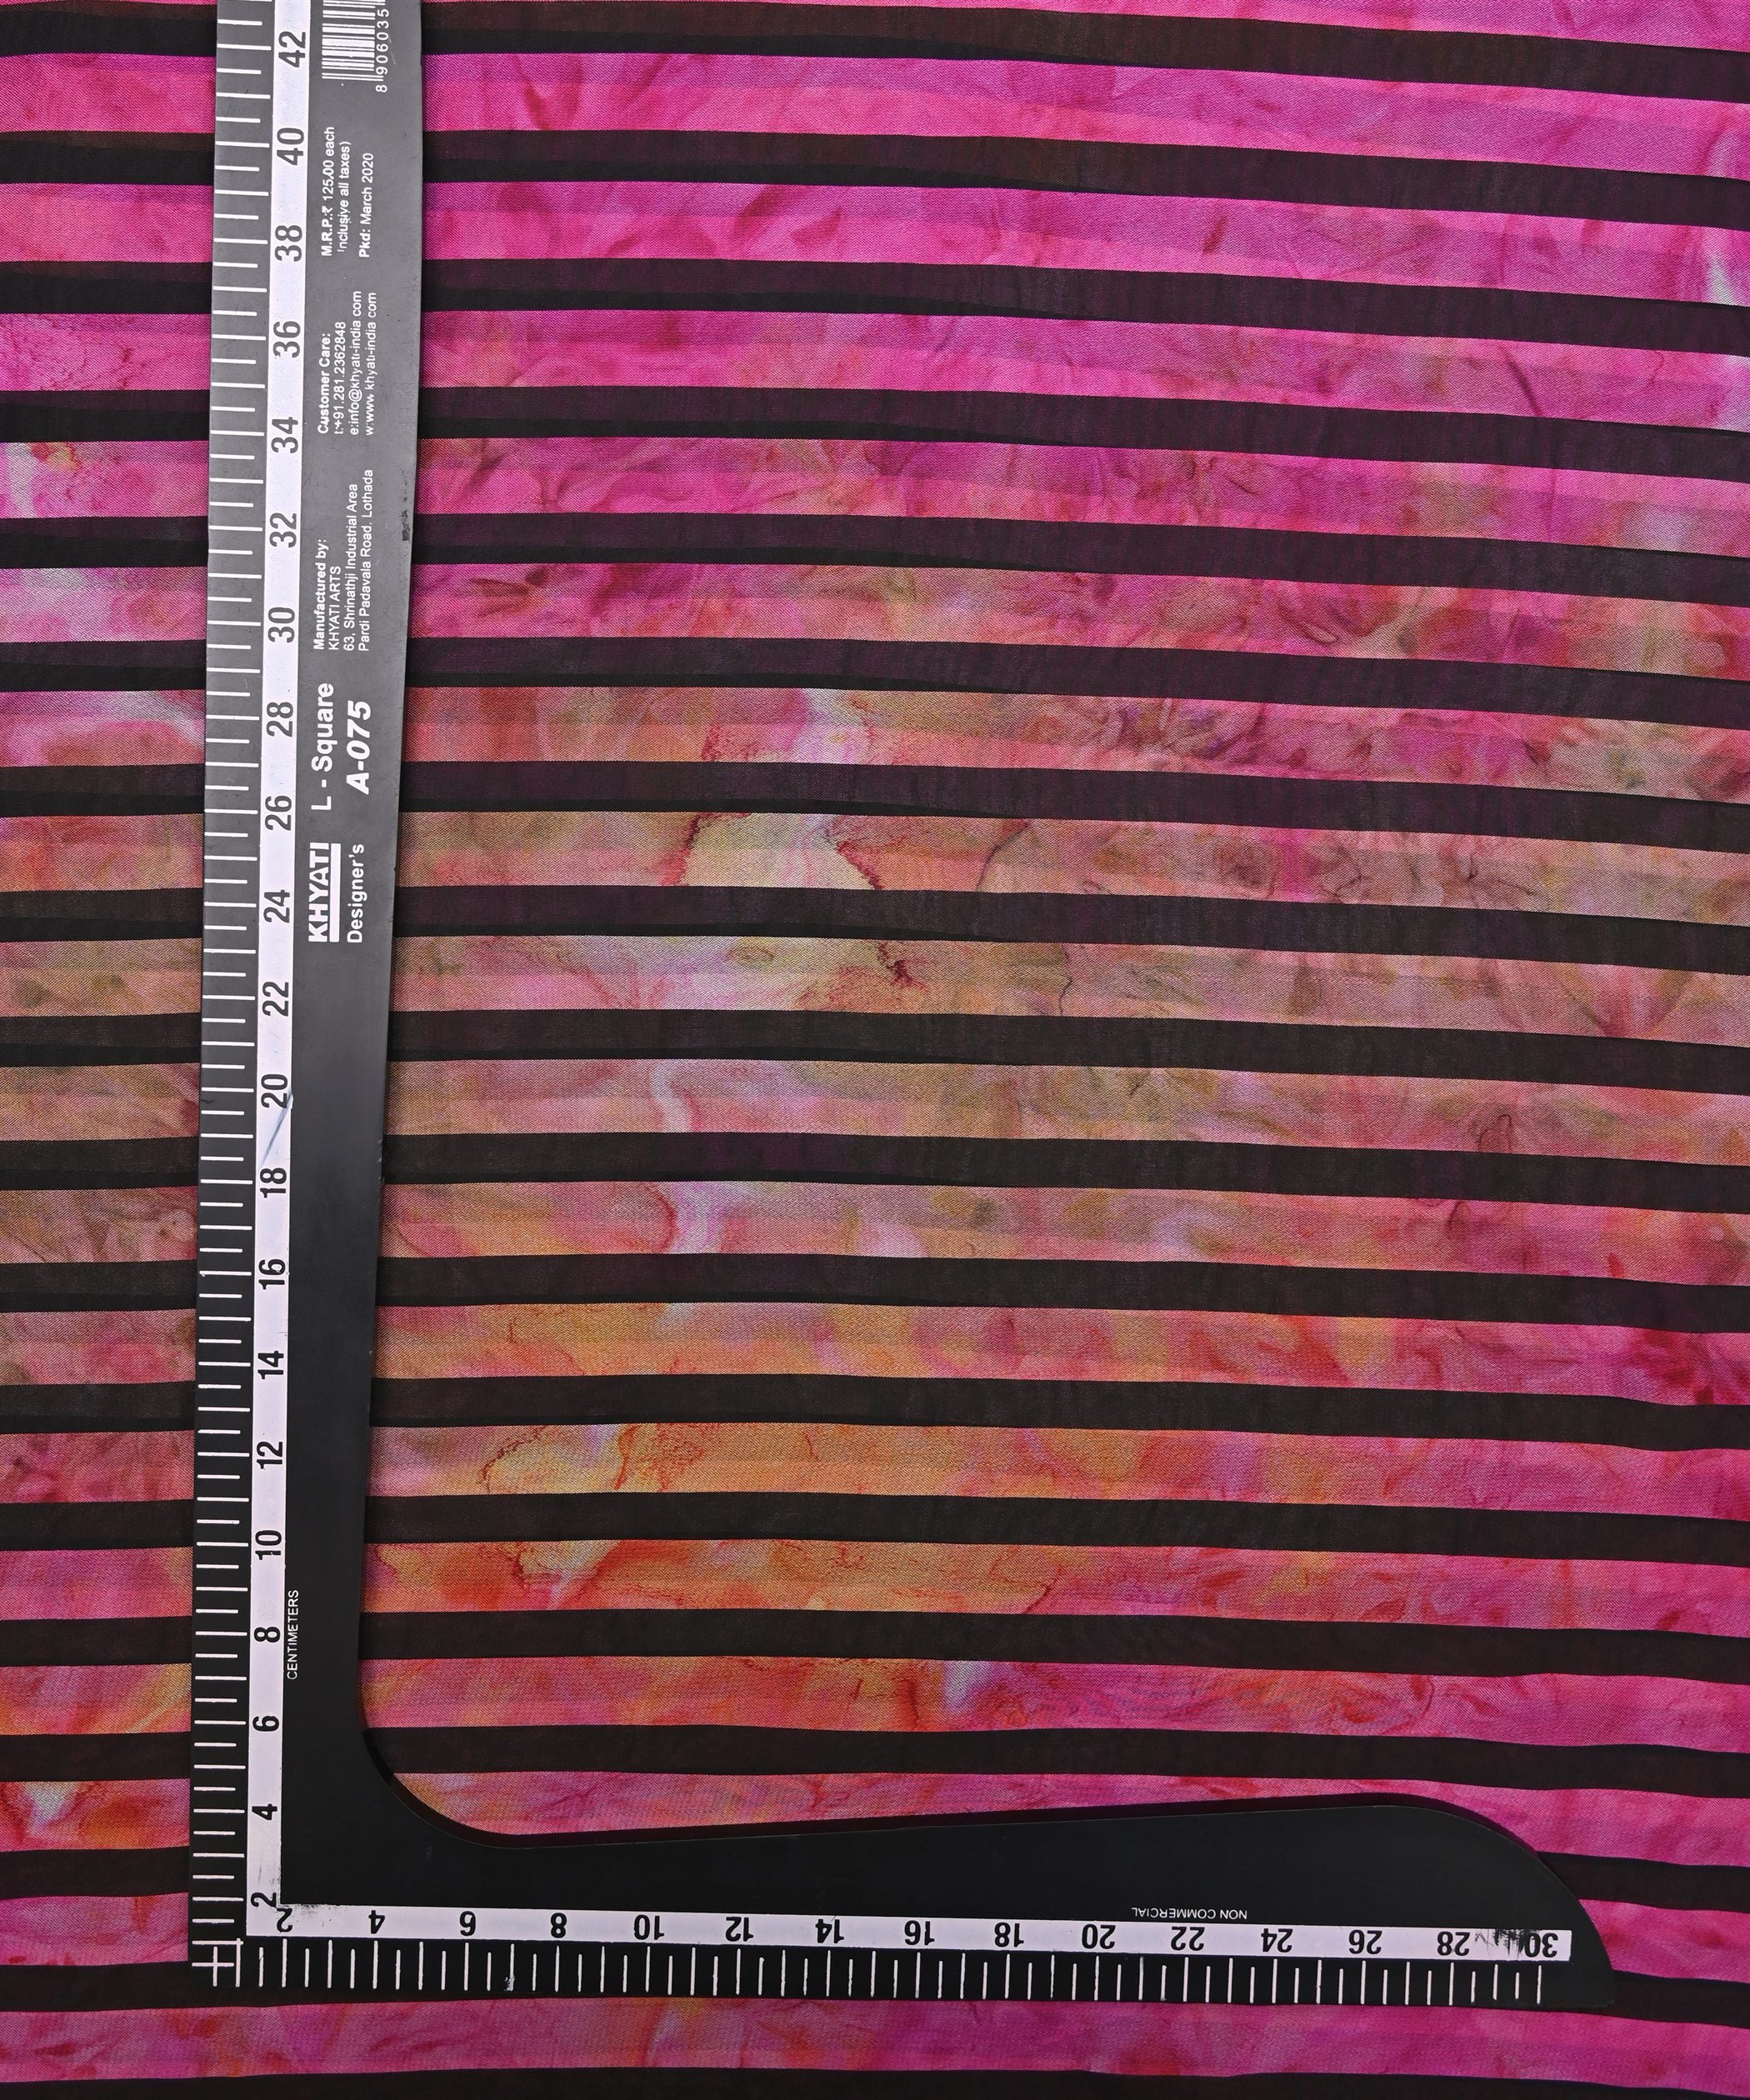 Pink Tie and Dye Georgette Fabric with Zebra Stripes